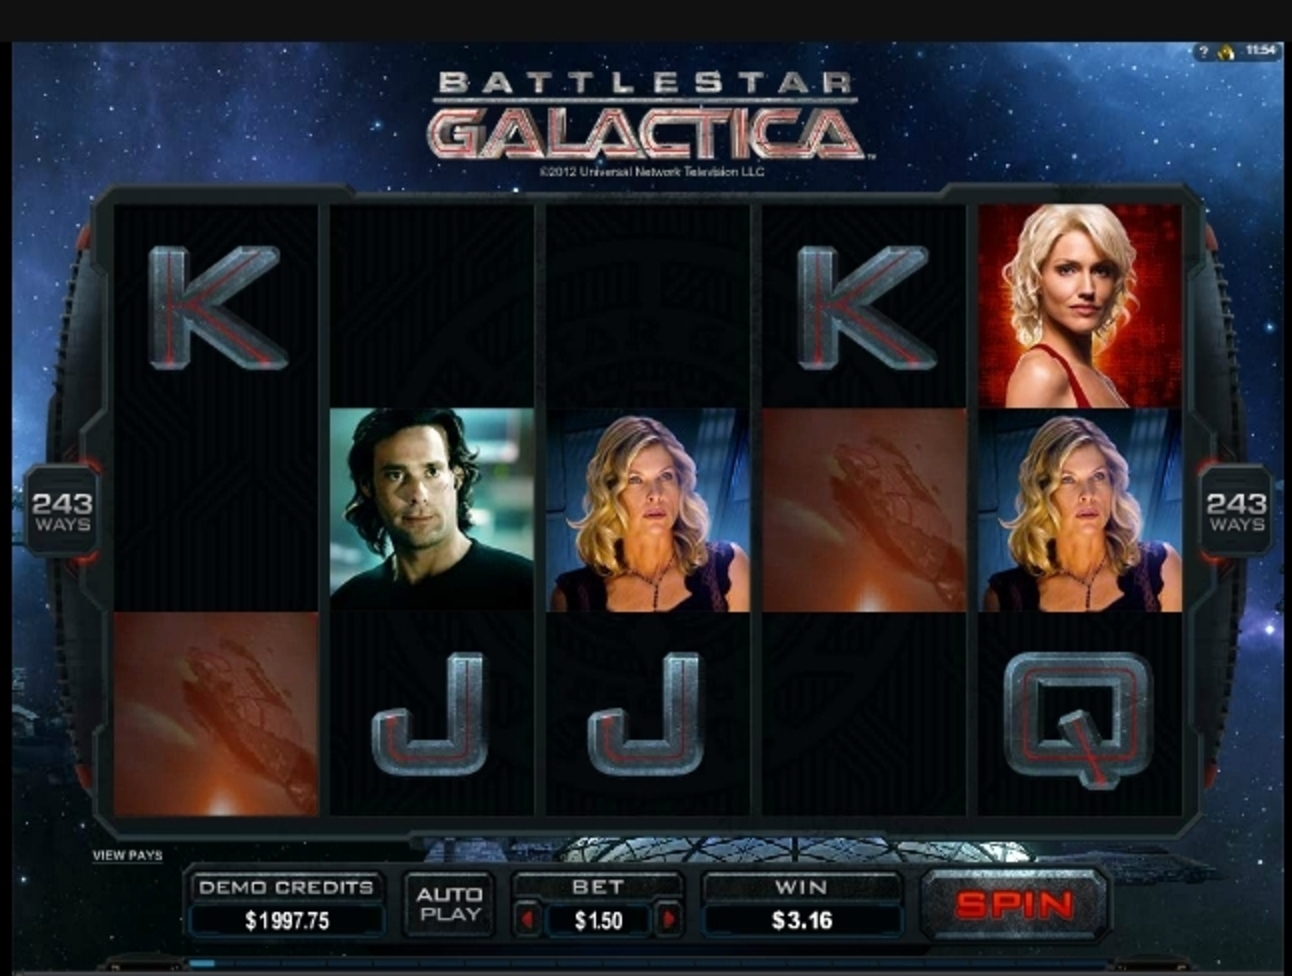 Win Money in Battlestar Galactica Free Slot Game by Microgaming